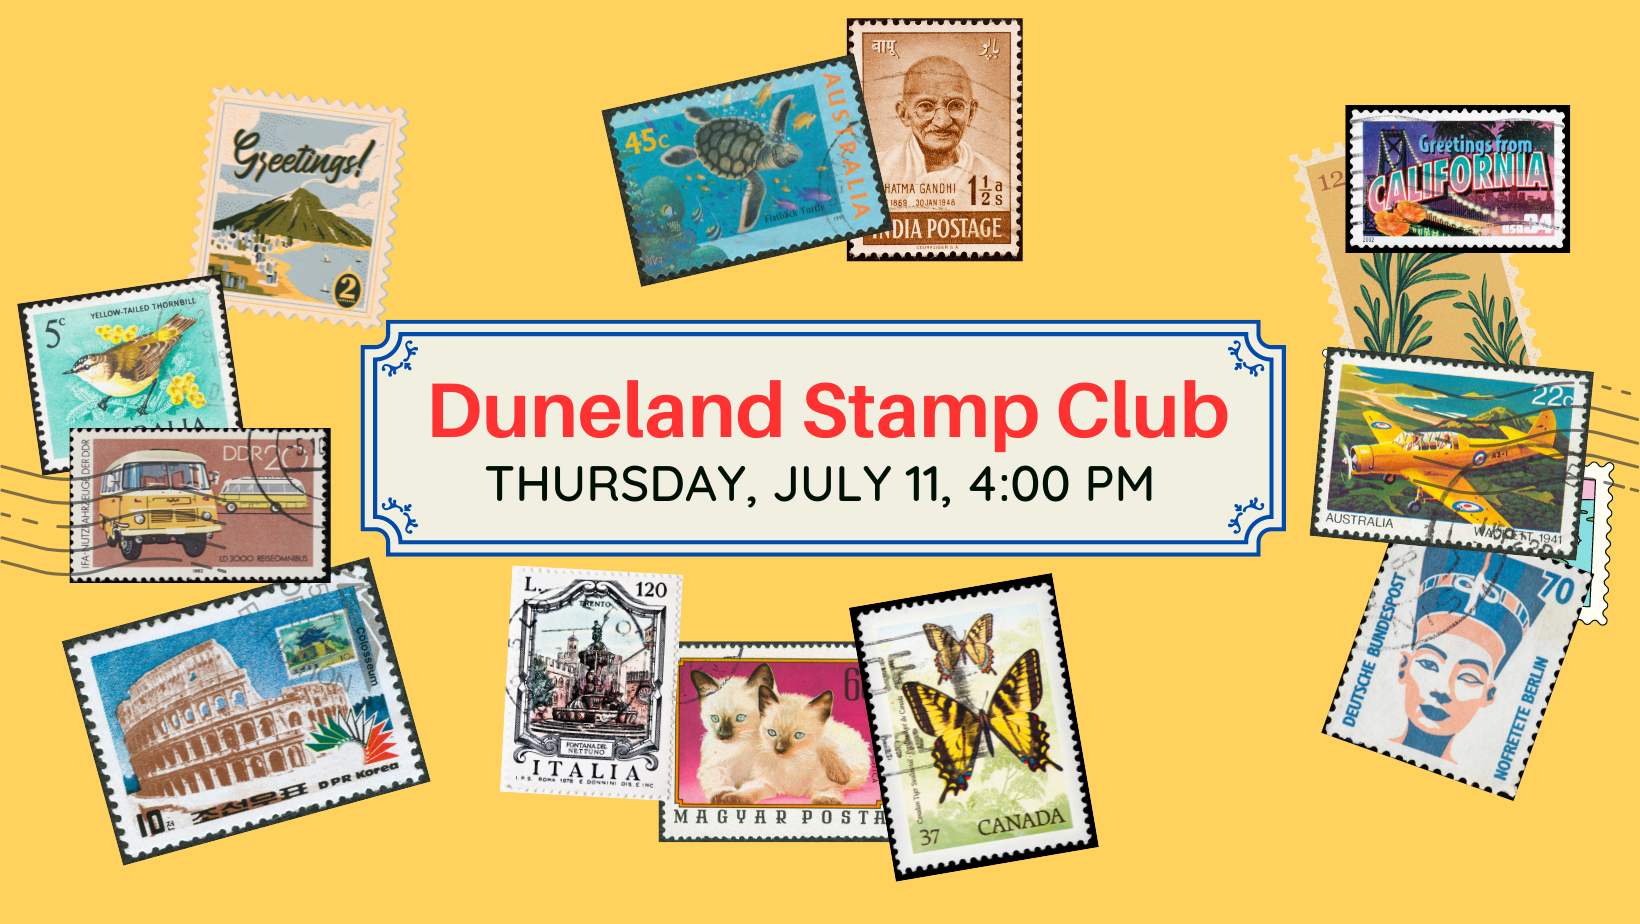 Duneland Stamp Club, Thursday, July 11 at 4:00 pm